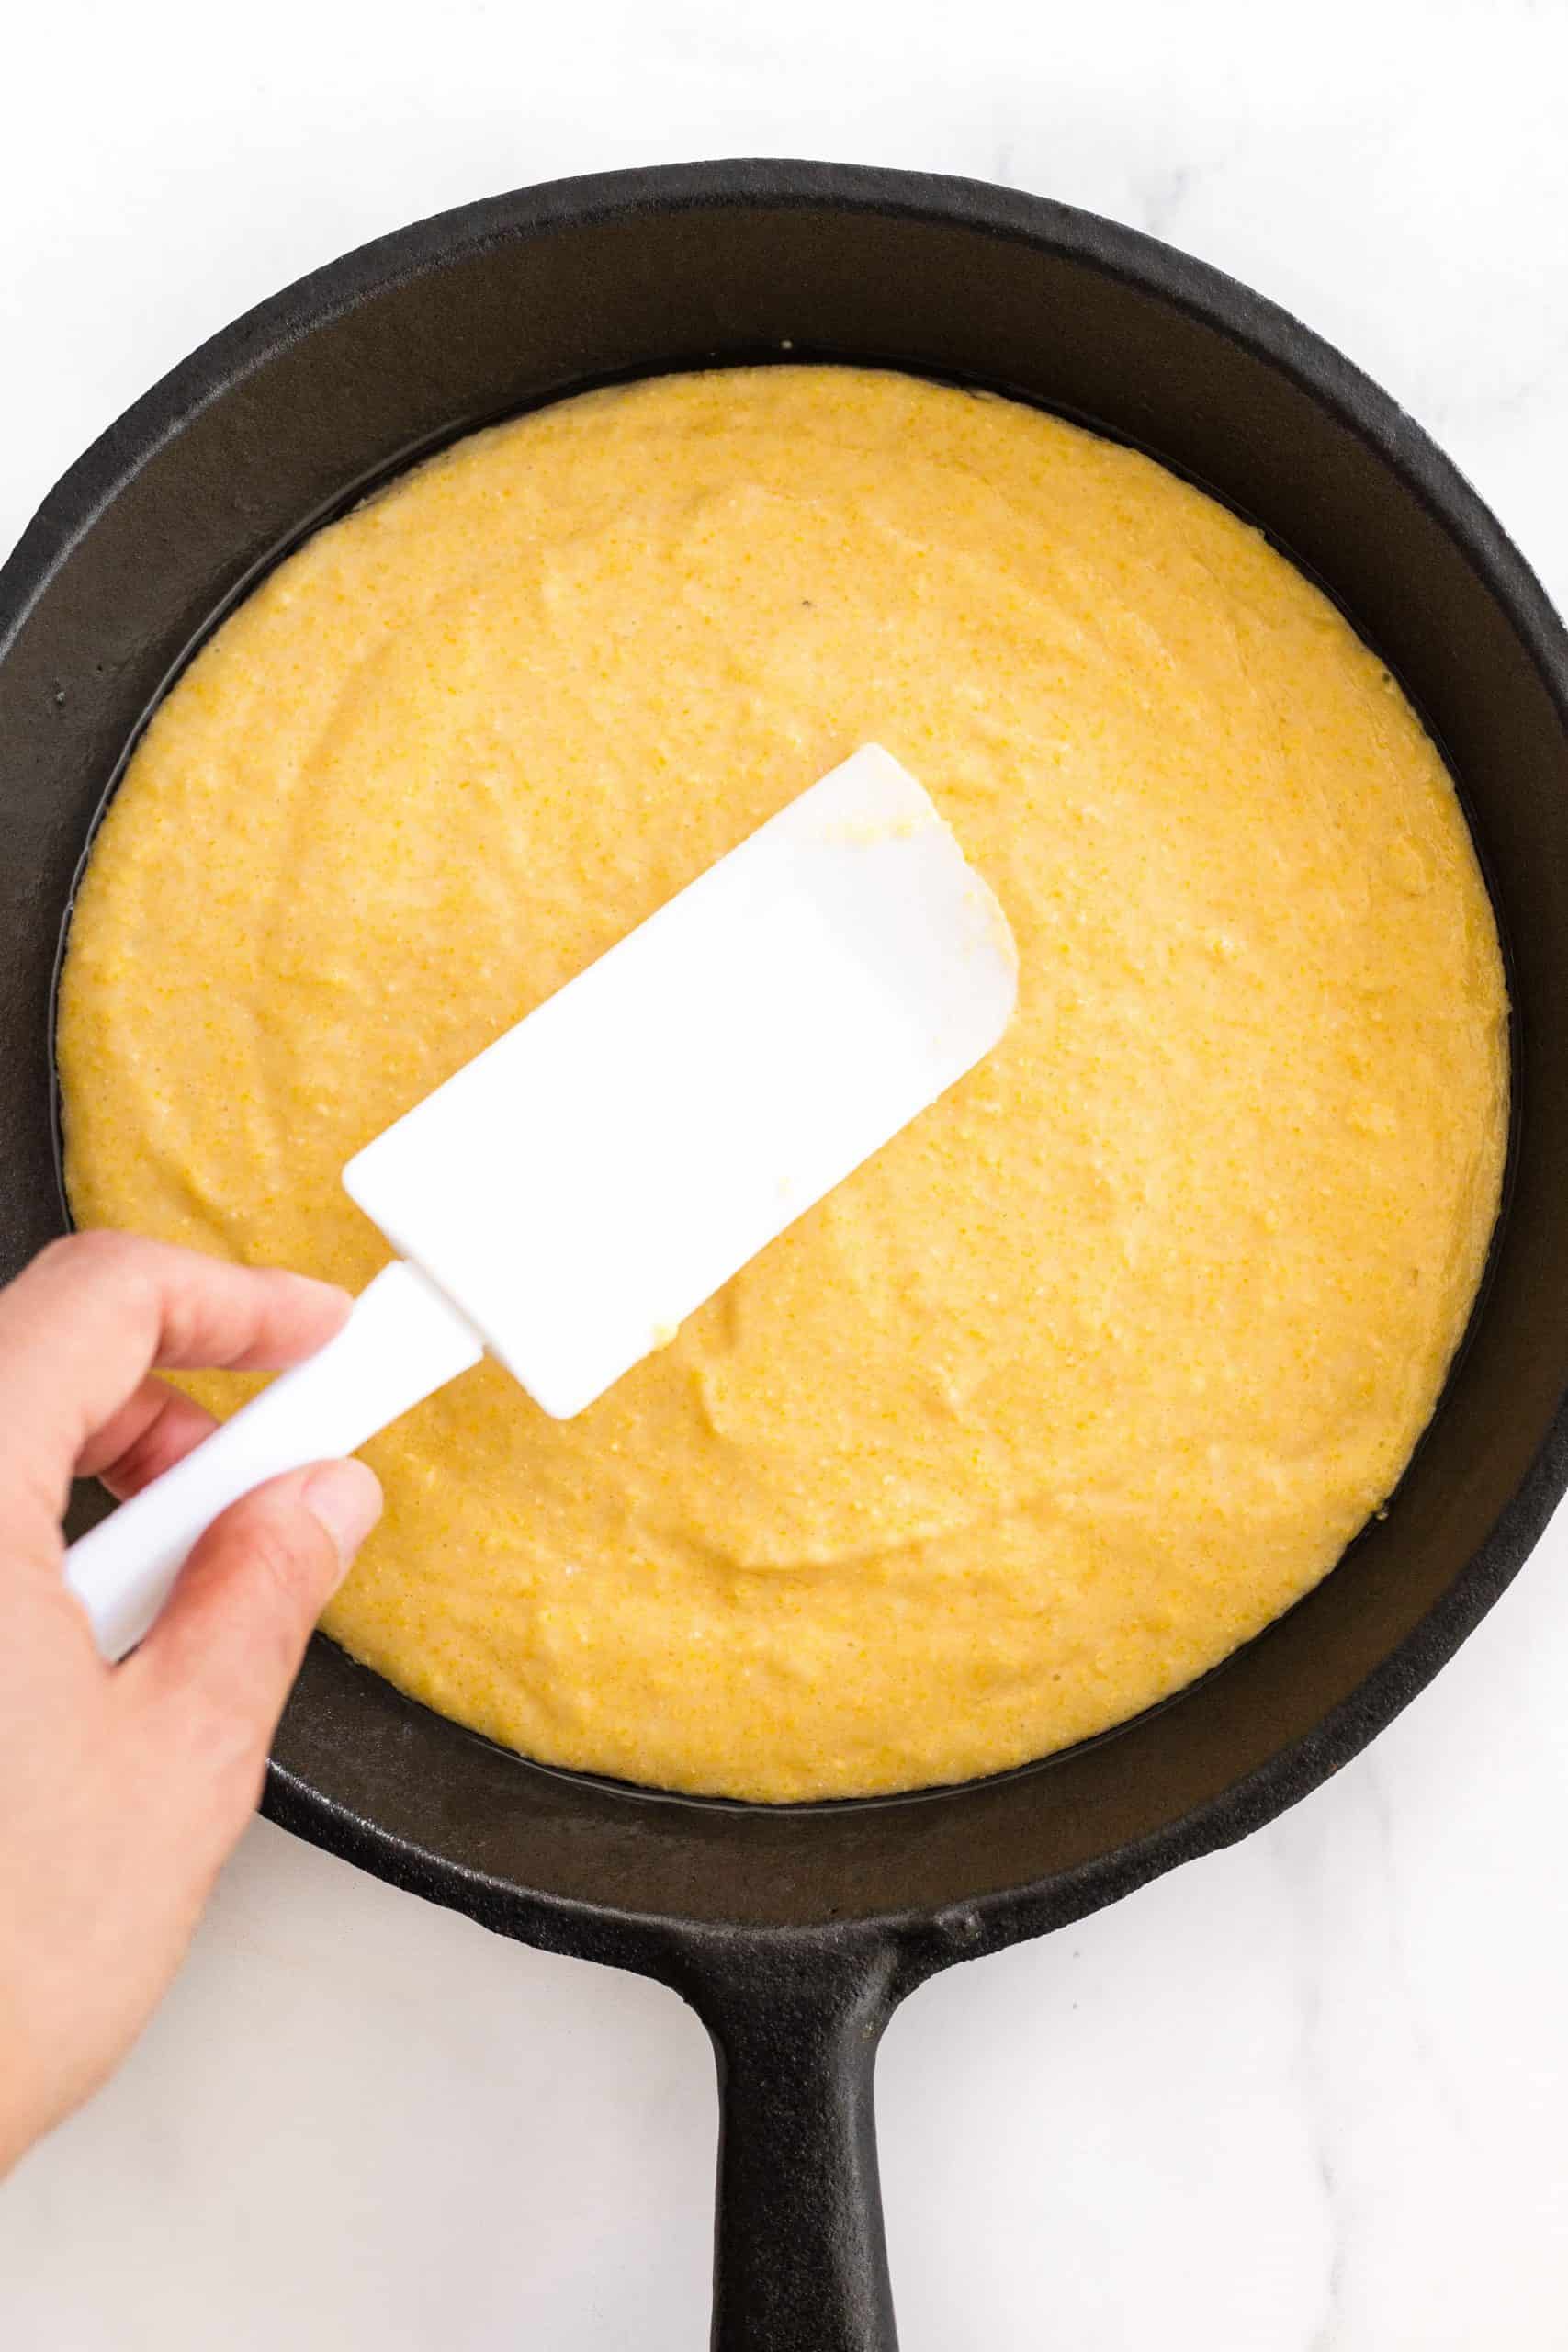 Using a spatula to smooth out the batter in a cast iron skillet.